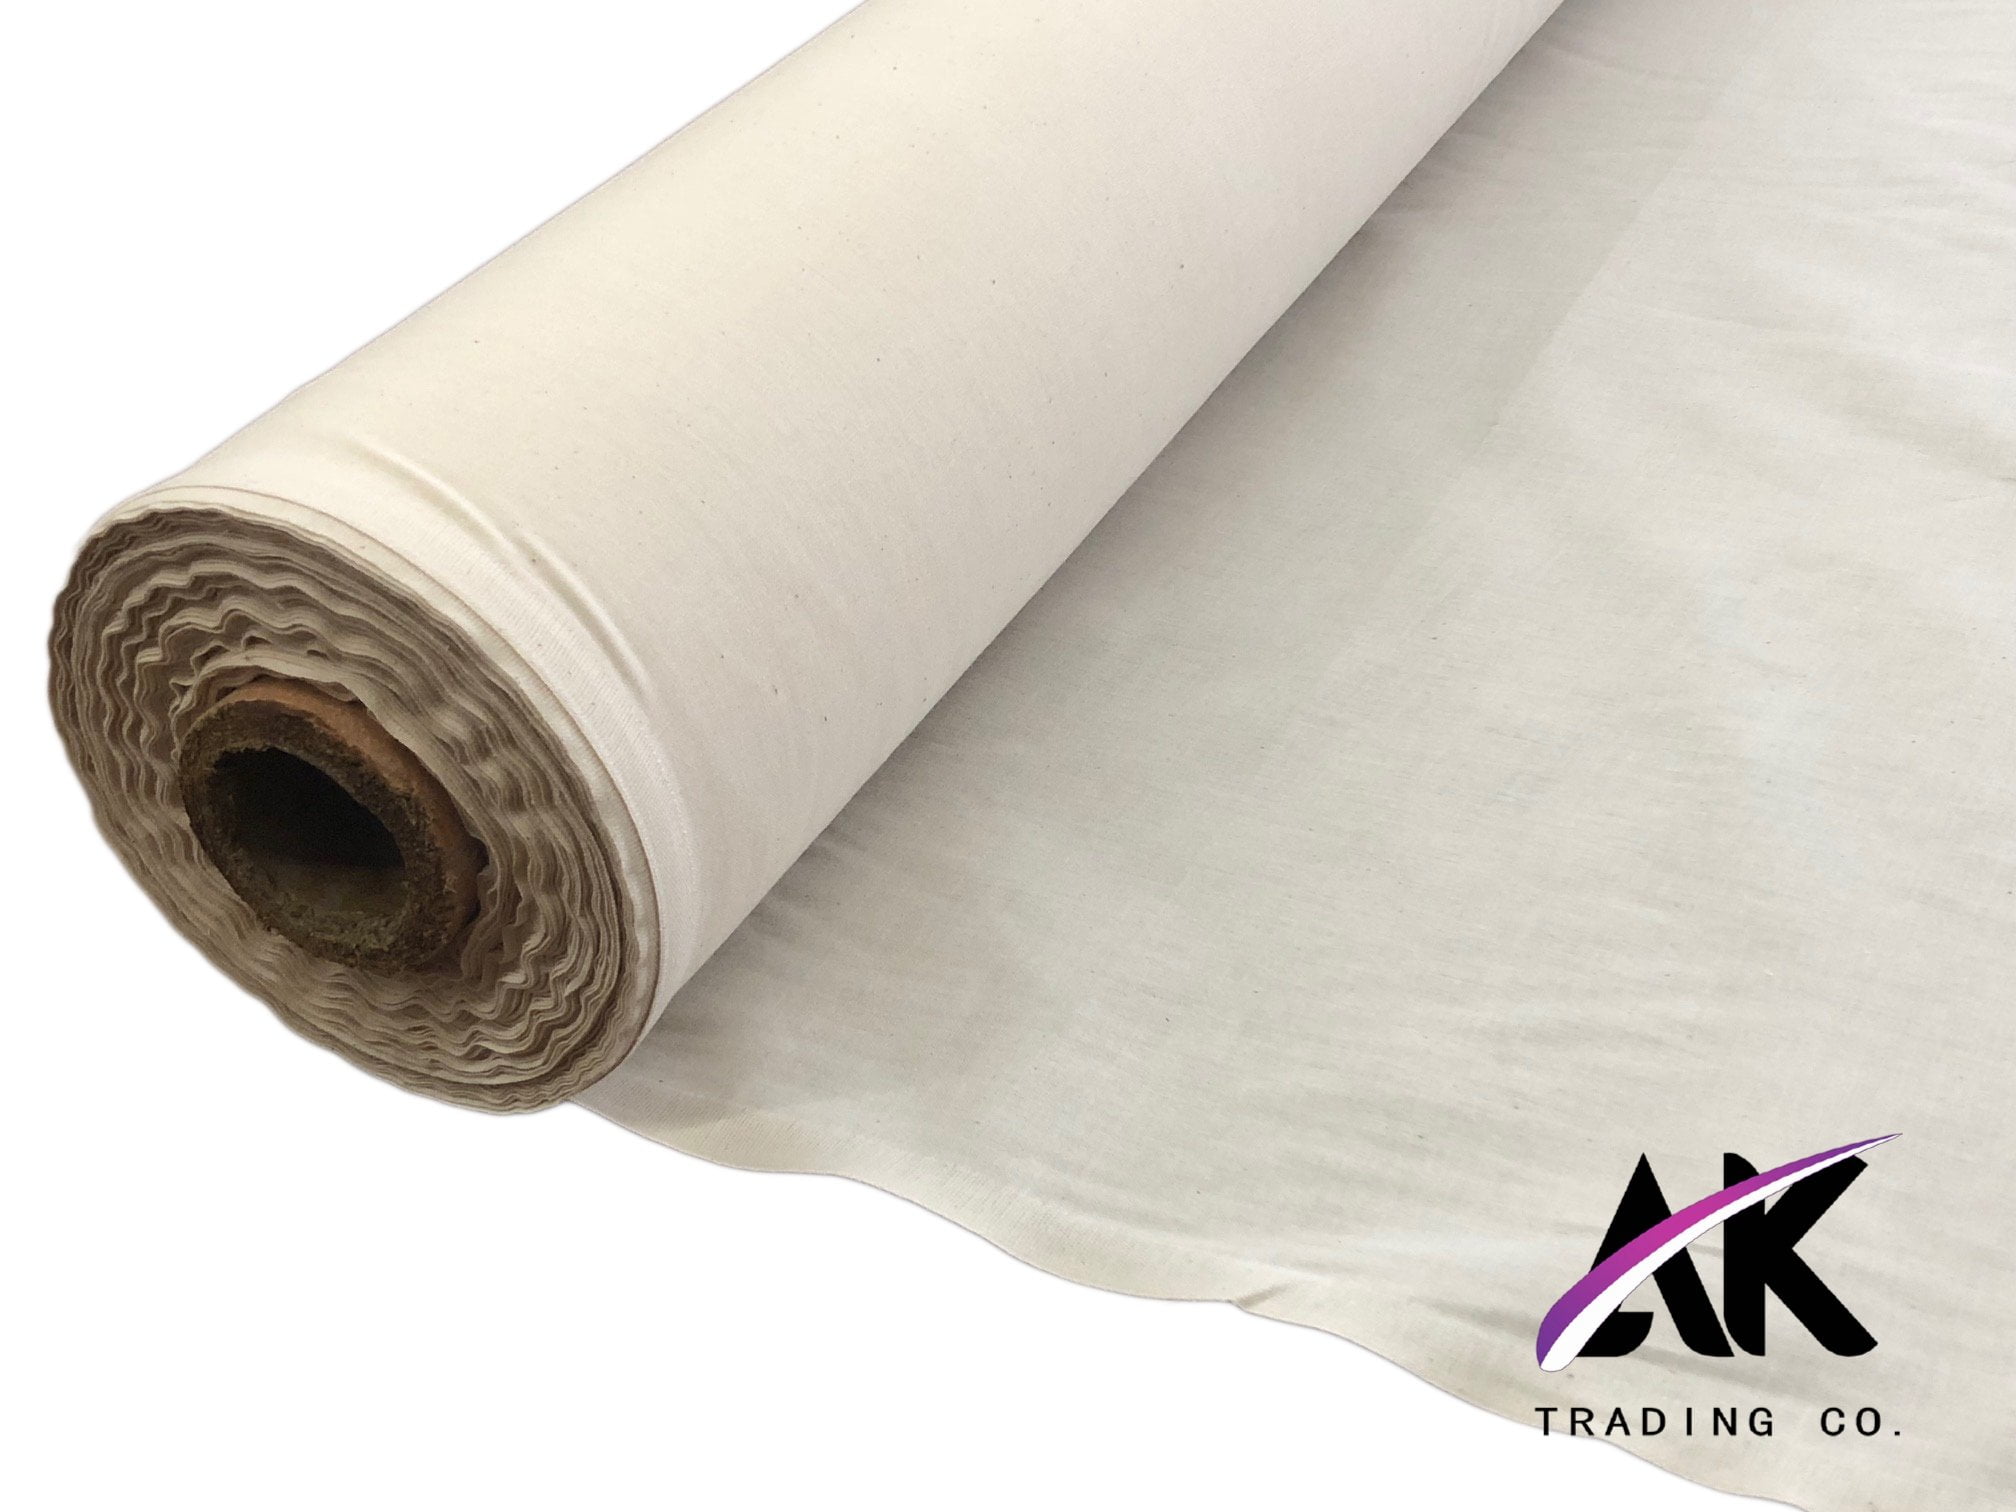 Sedona Designz Natural 100% Cotton Muslin Fabric/Textile Unbleached - Draping Fabric - 100 Yards Continuous(60in. Wide), Size: Medium